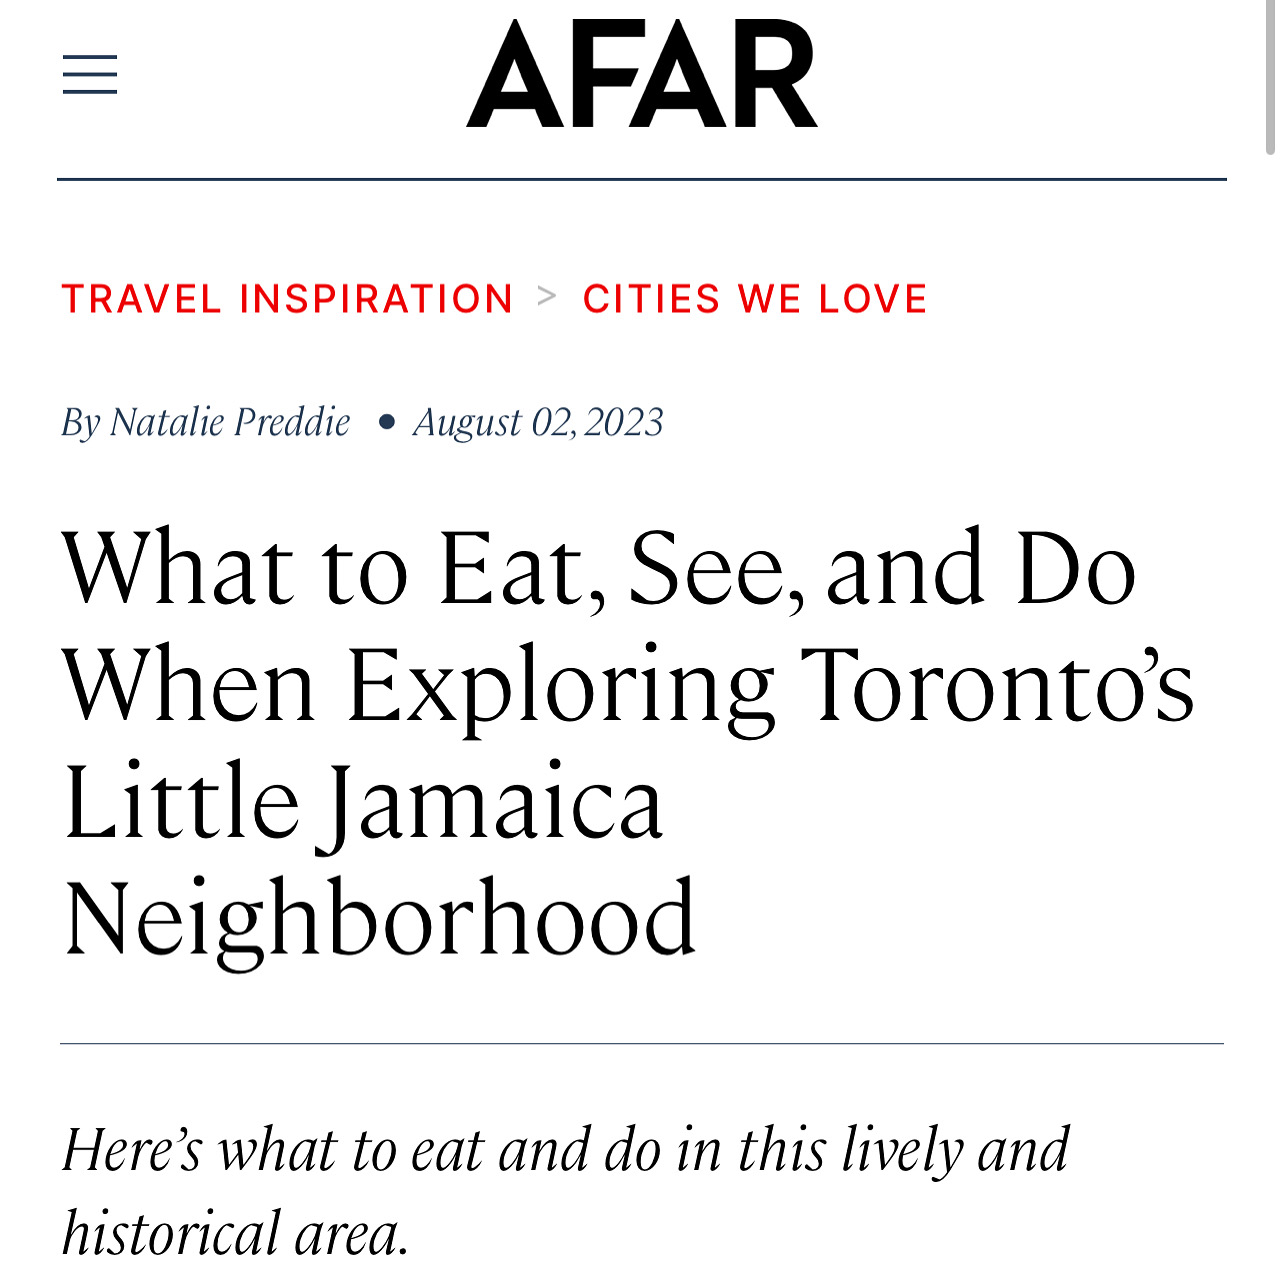 What to Eat, See, and Do When Exploring Toronto’s Little Jamaica Neighborhood